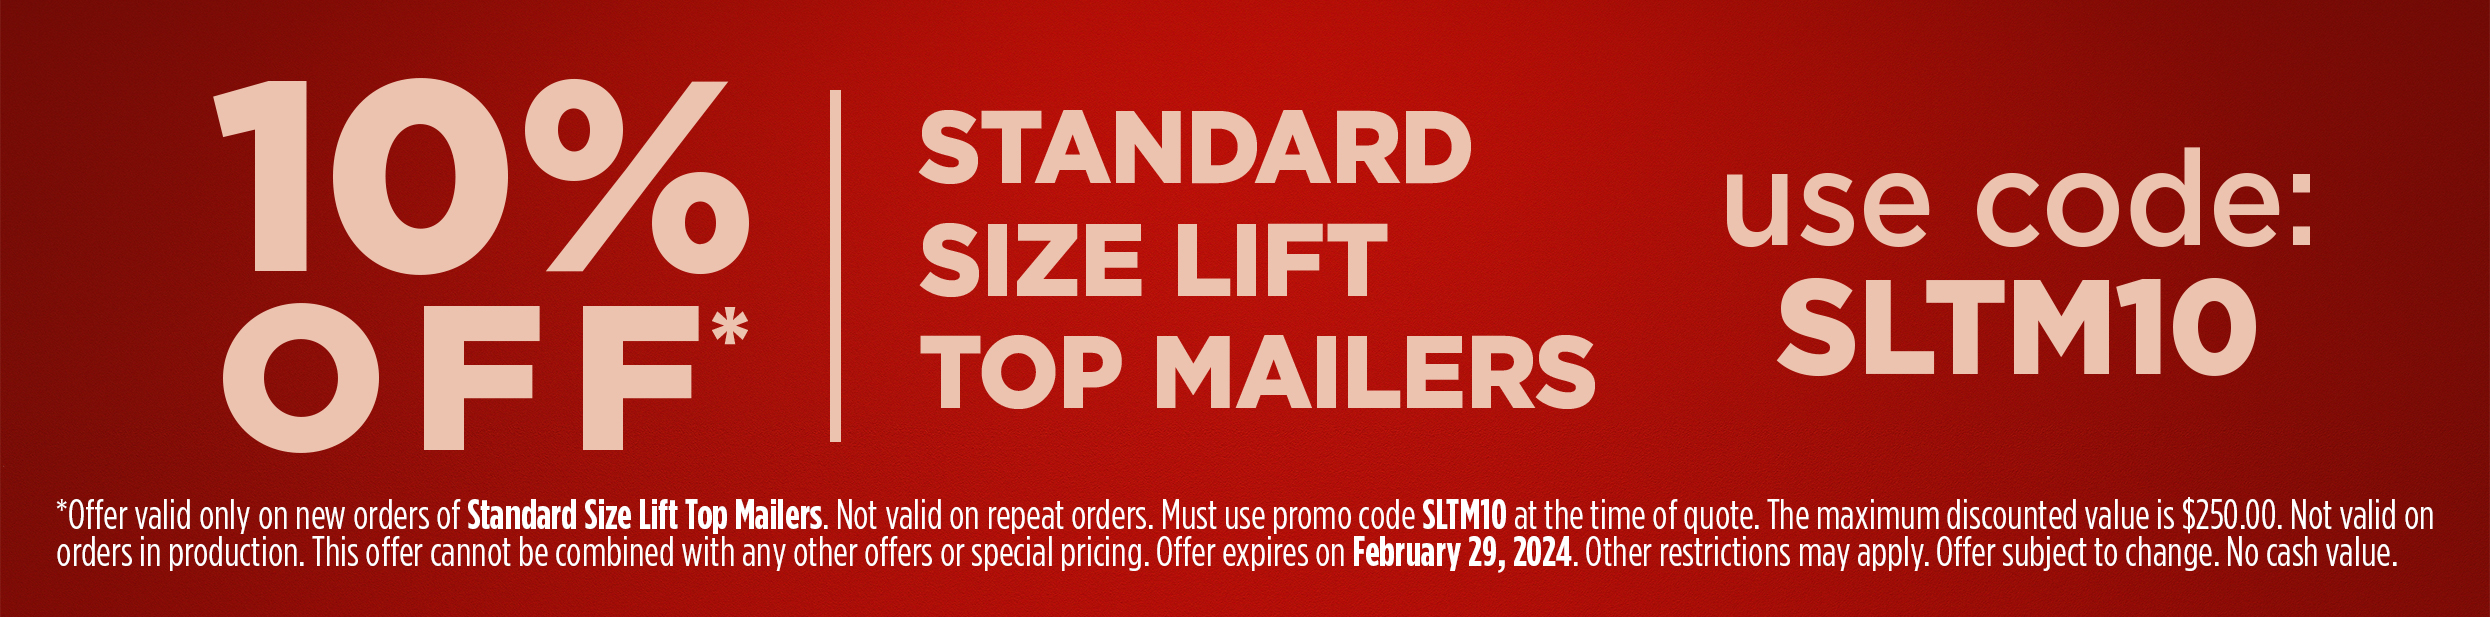 10% off Standard Size Lift Top Mailers with Code SLTM10. Offer Expires Feb 29, 2024.